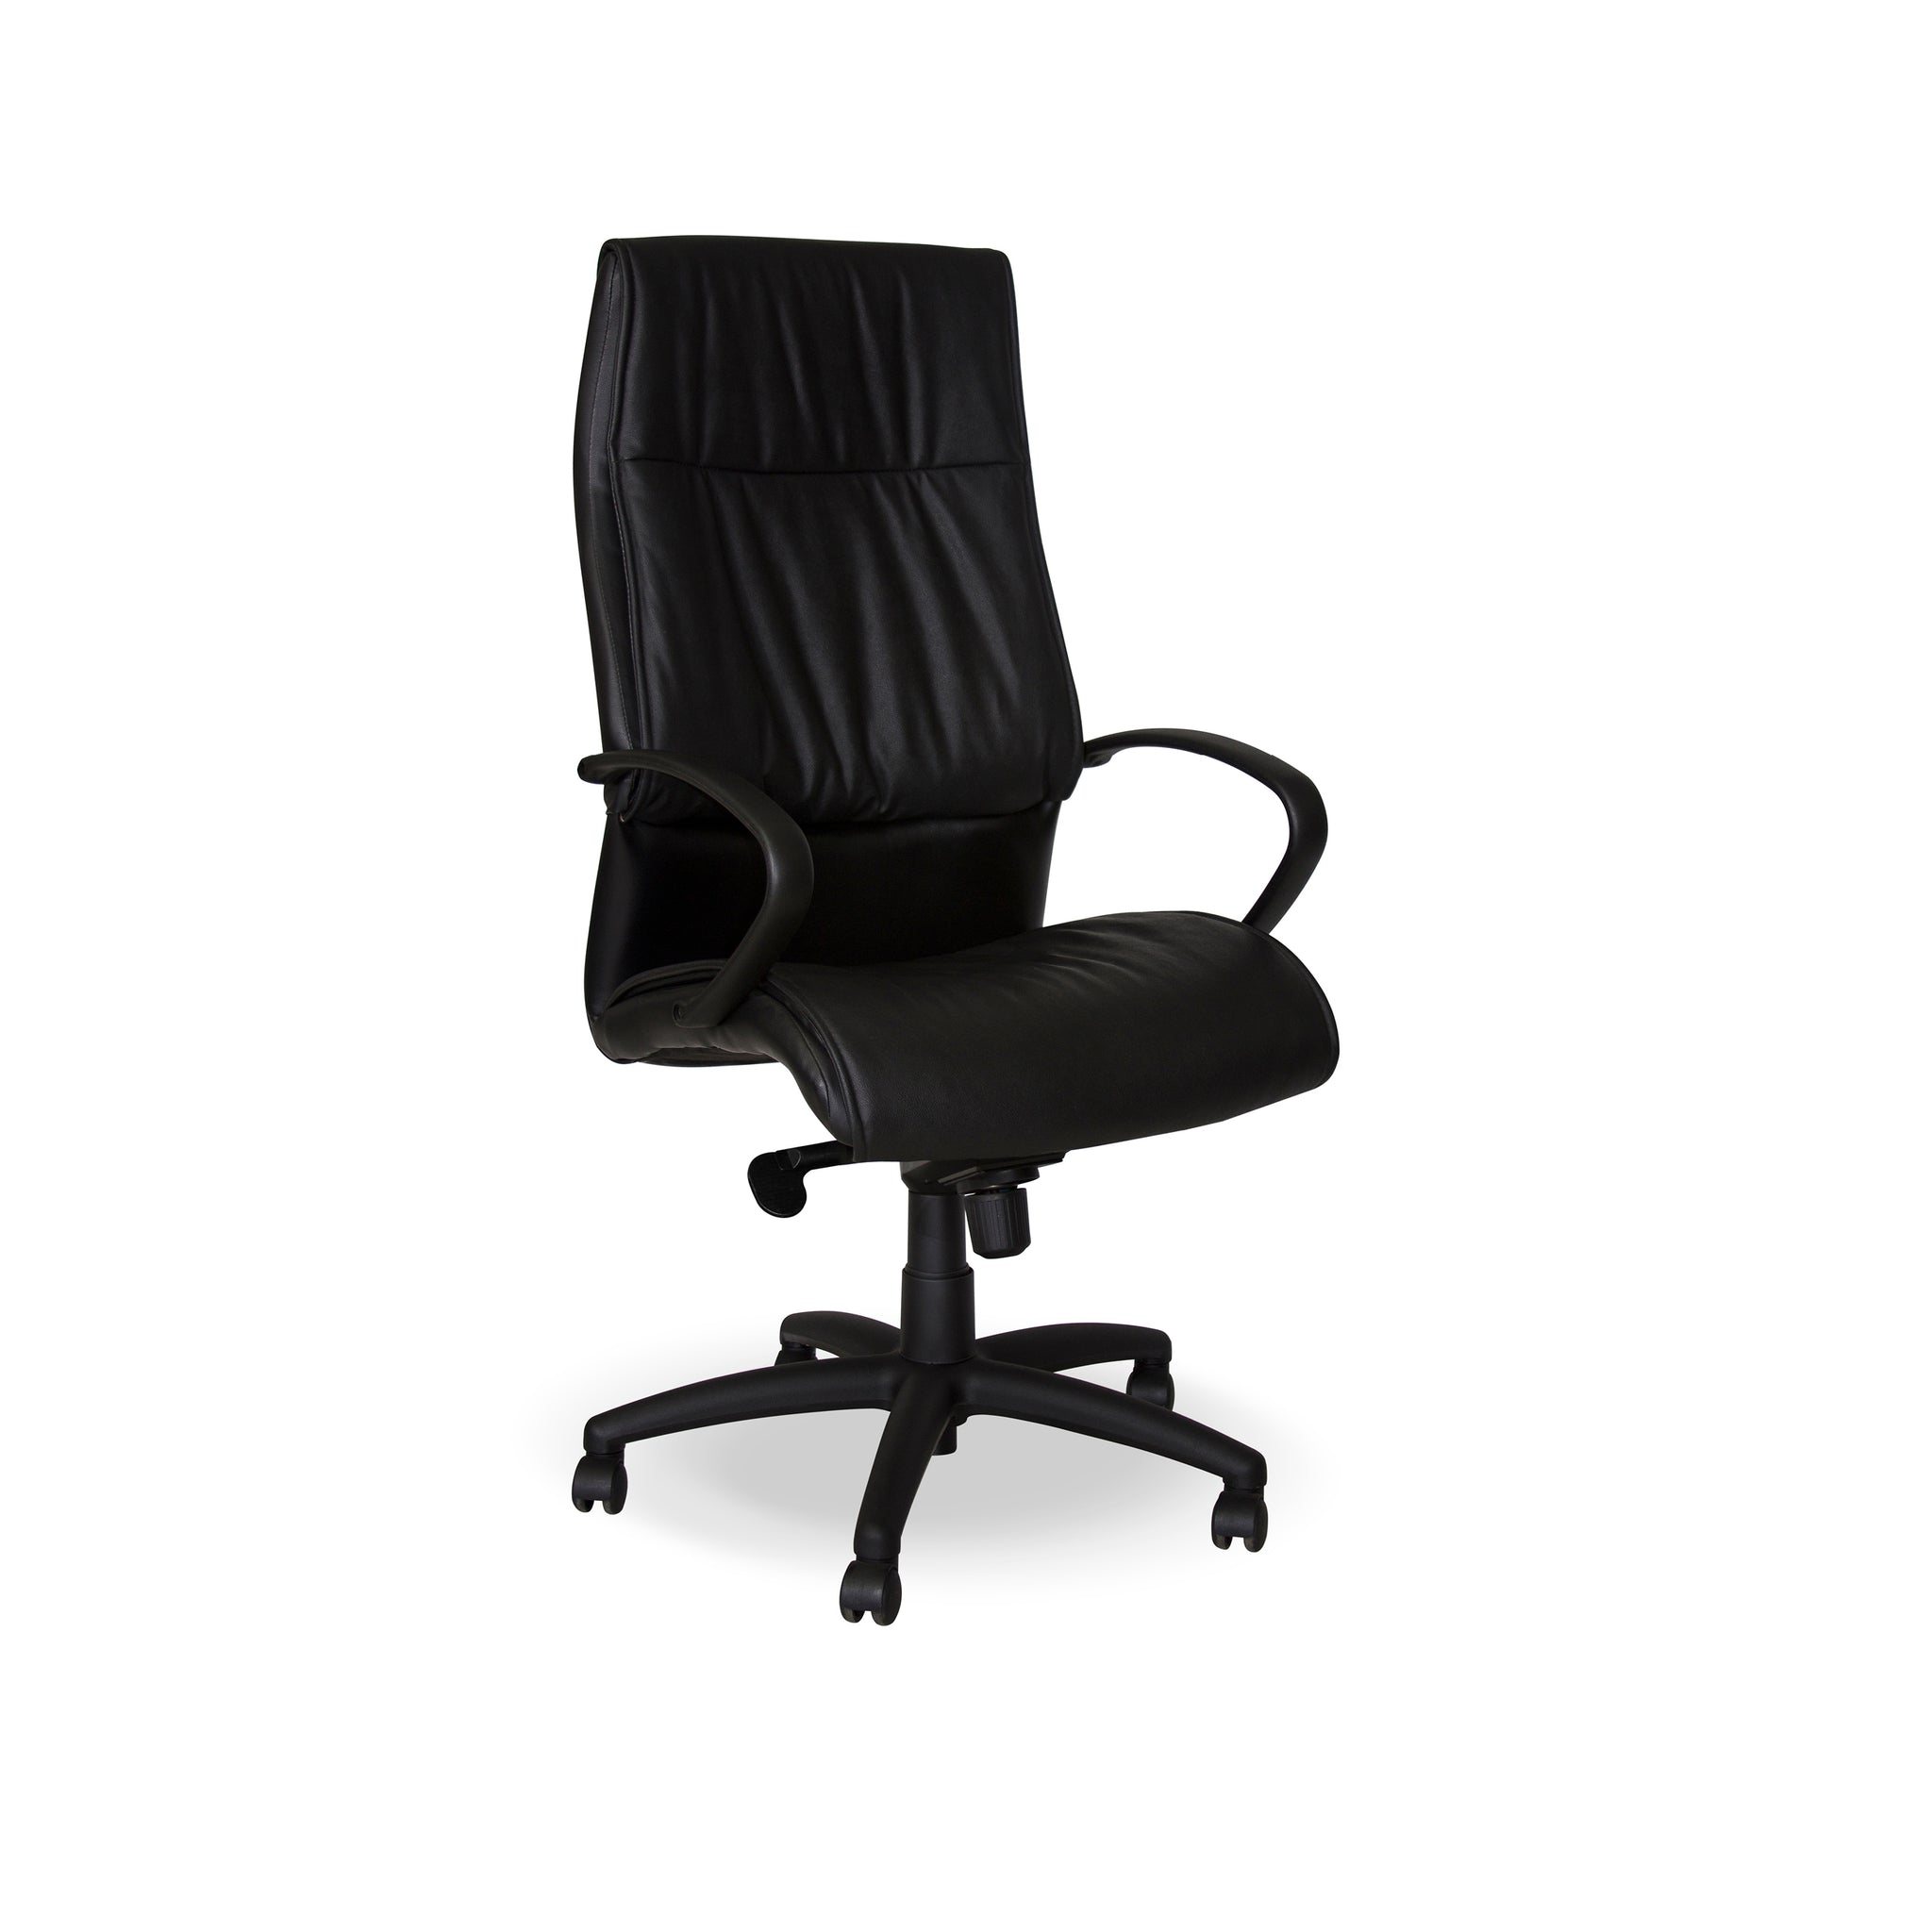 Hedcor Mirage high back office chair